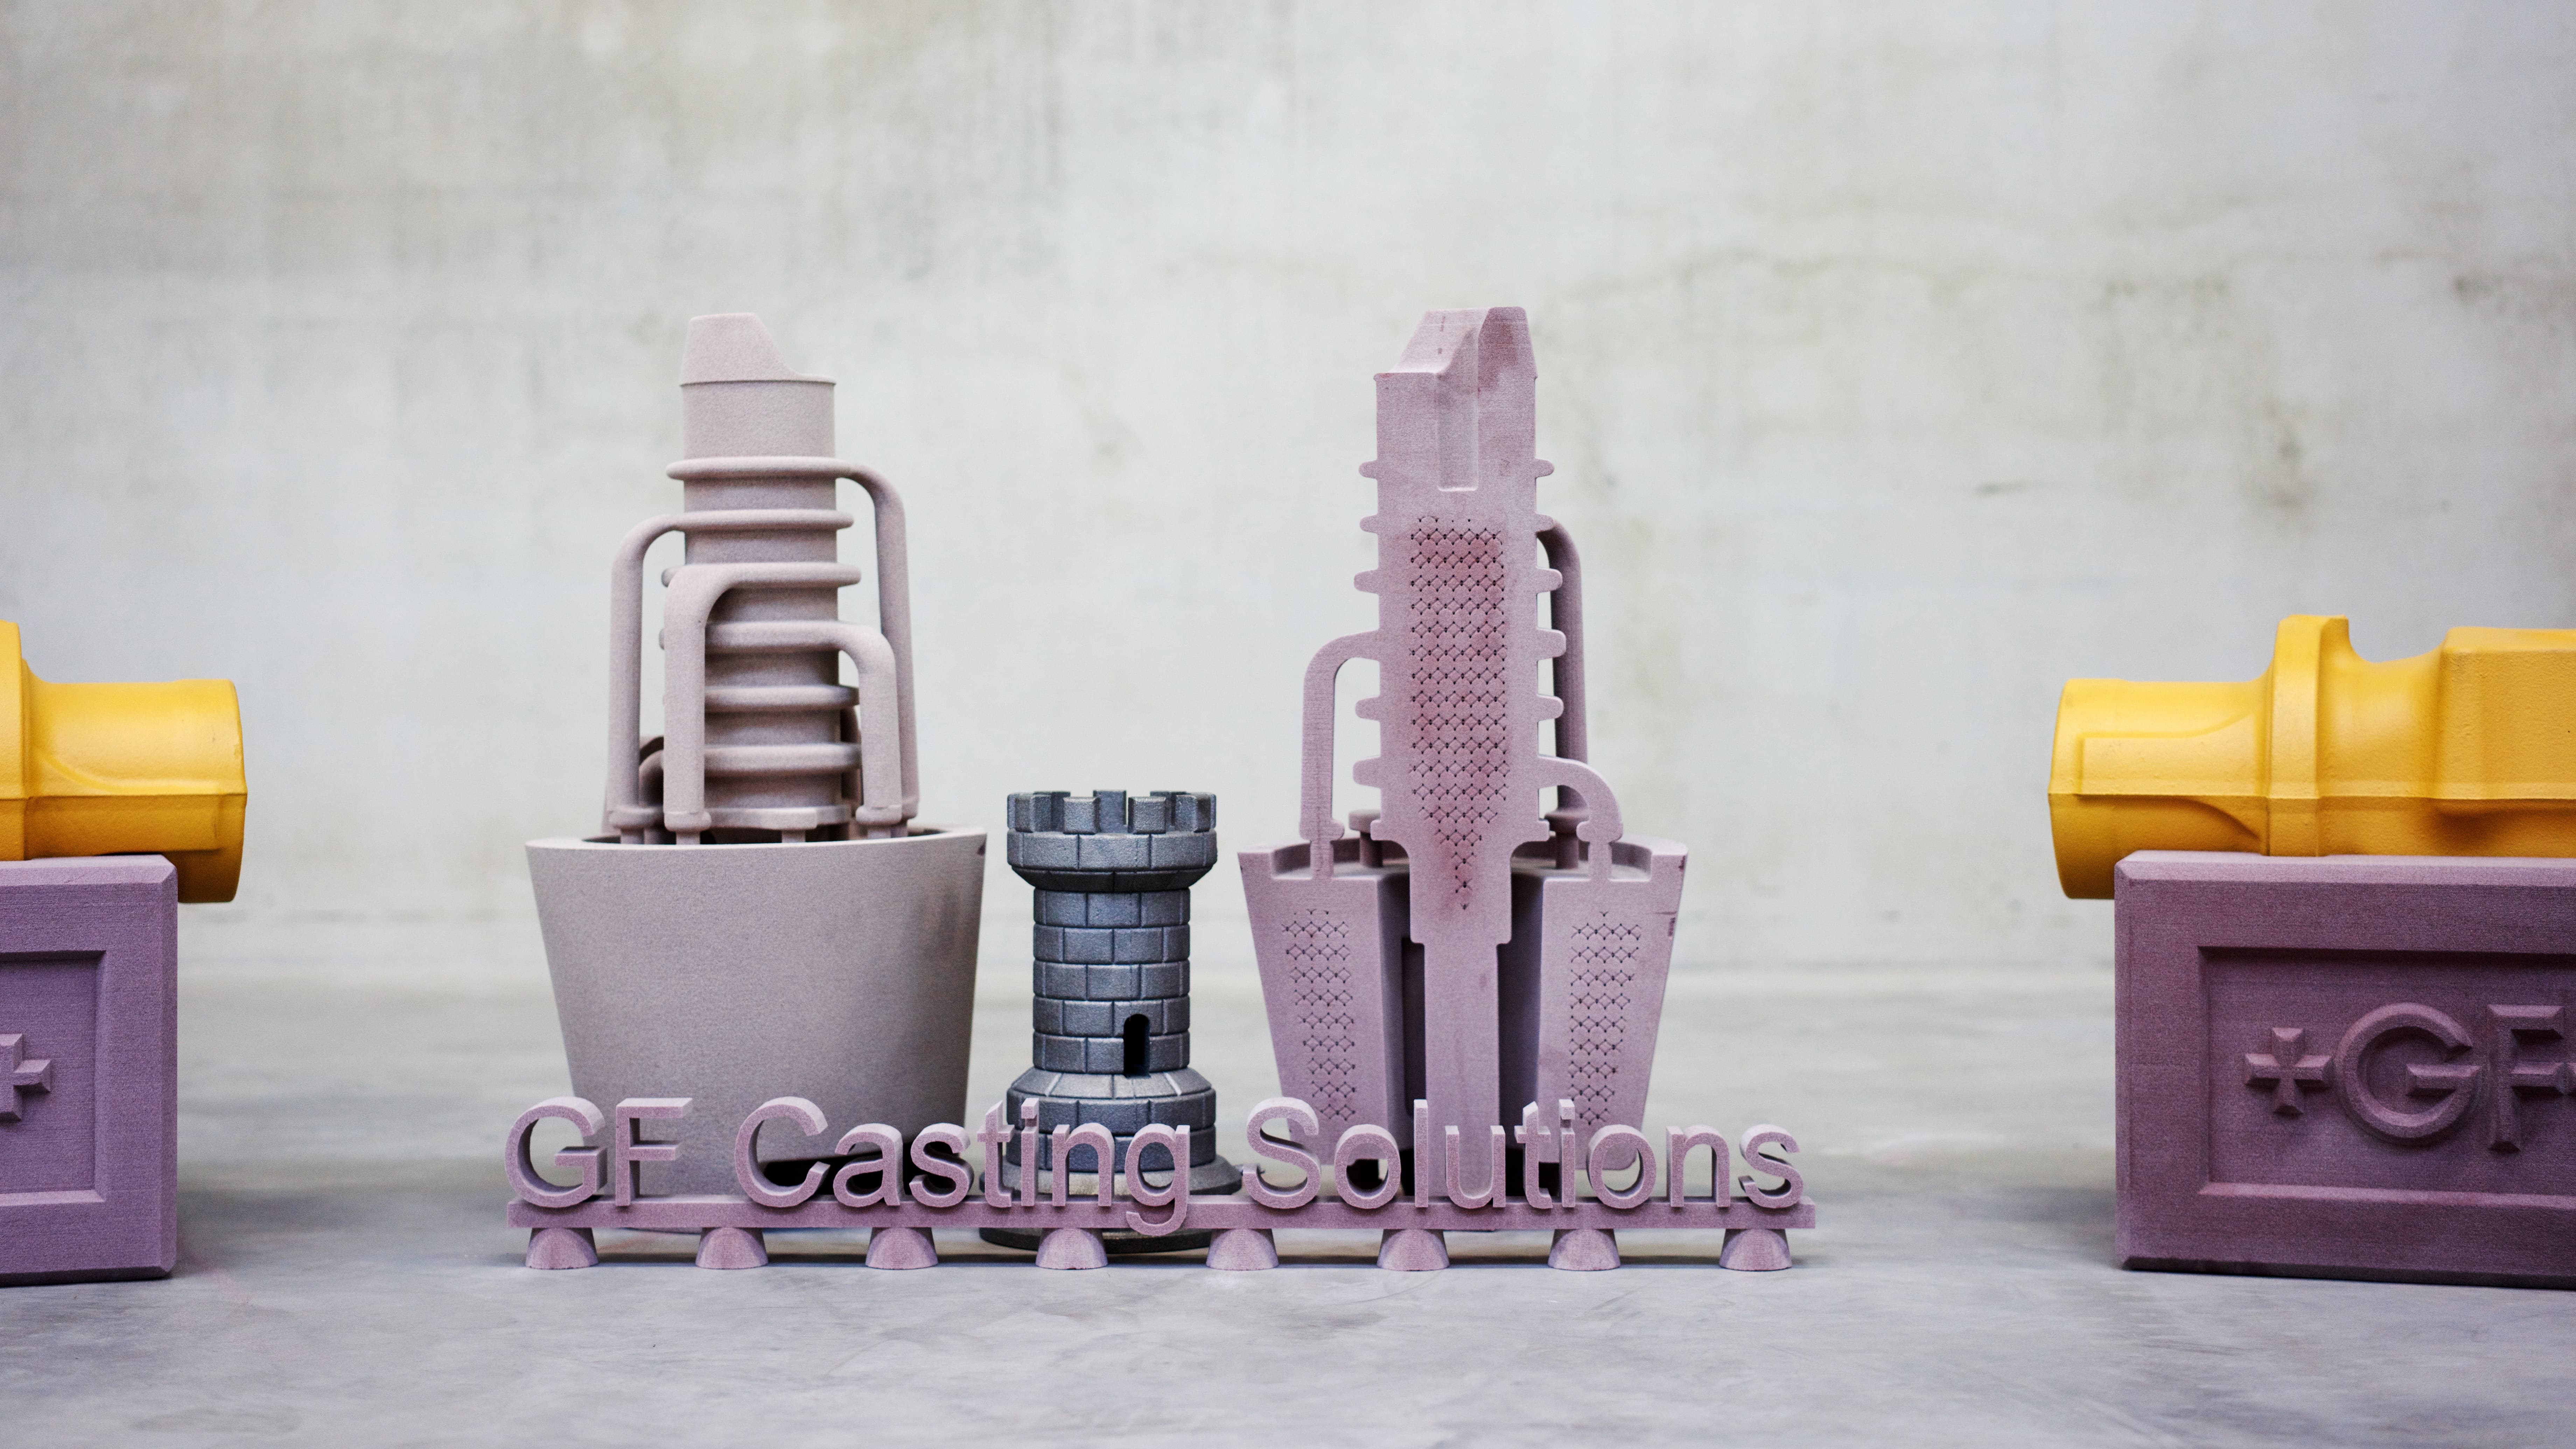 Since 2018, the iron casting location in Leipzig (DE) works successfully with its sand 3D printer.